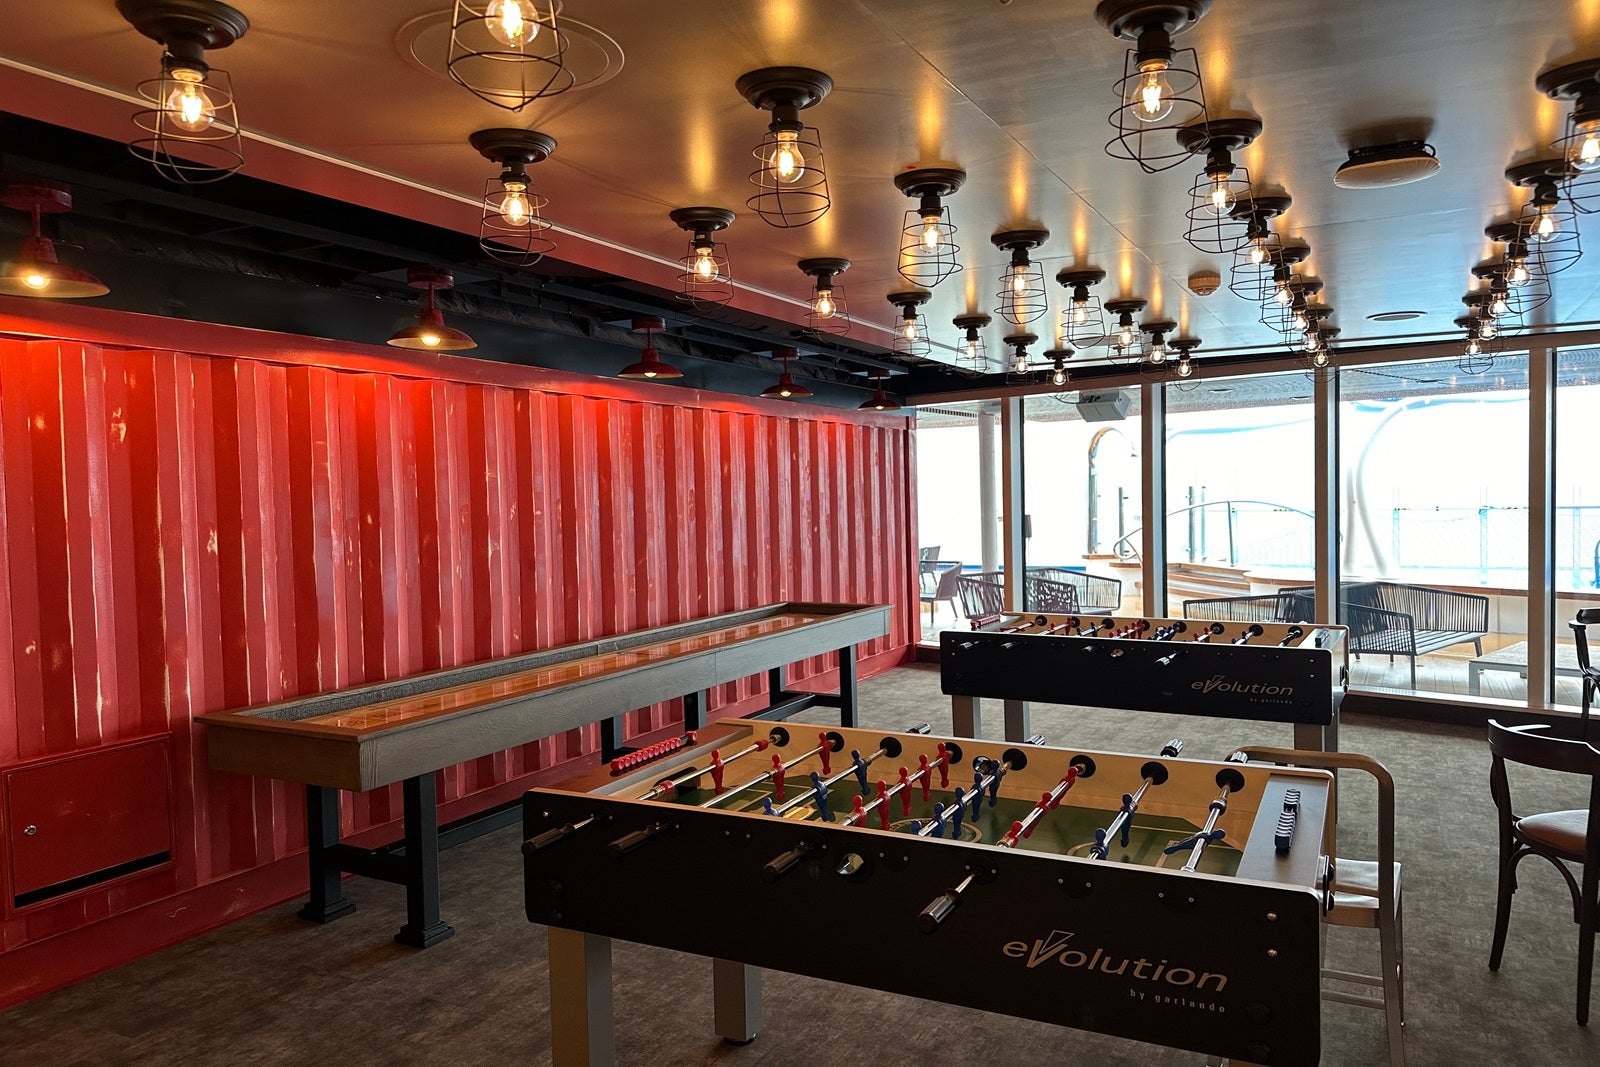 A gaming area with foosball